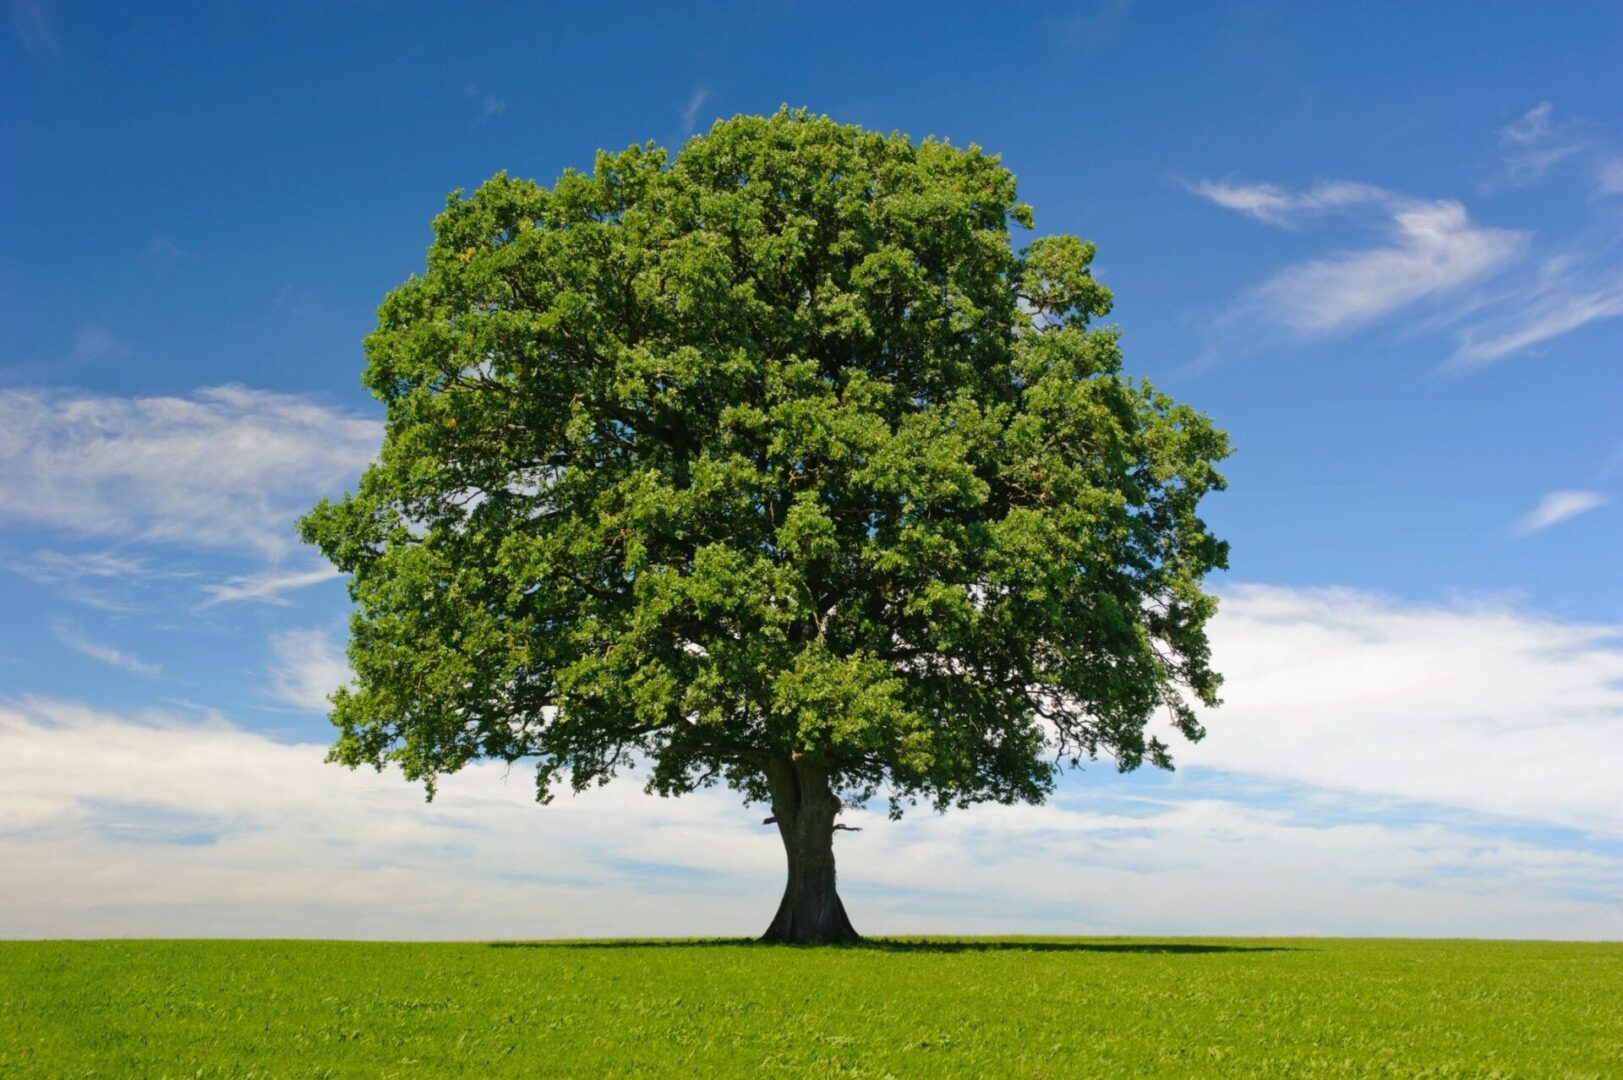 A tree is shown in the middle of a field.